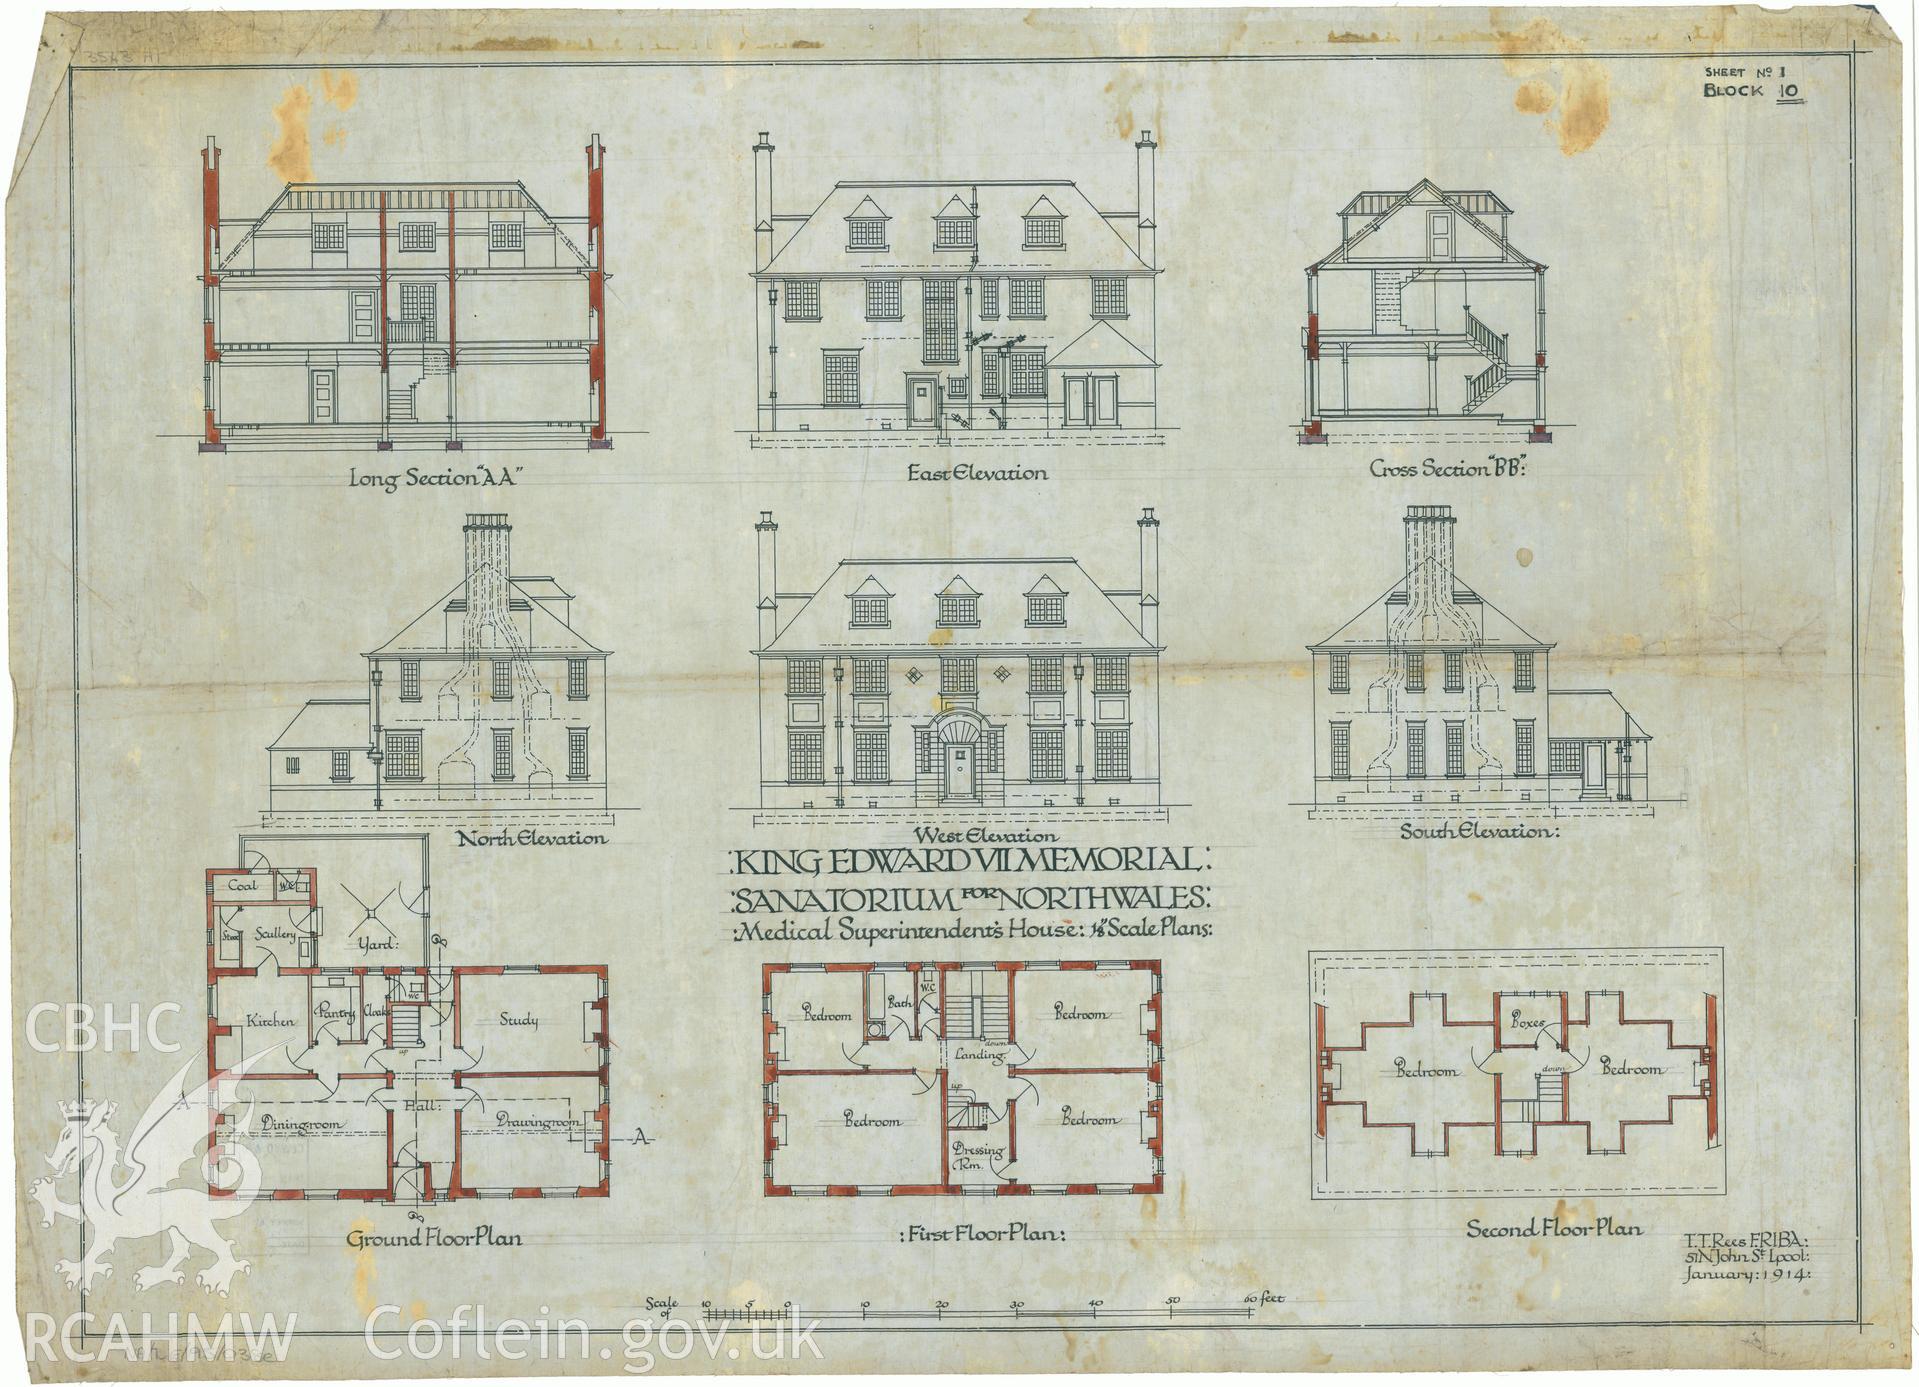 Measured drawing showing plans, elevations and section views of the Medical Superintendents house at King Edward VII Memorial Hospital for North Wales, Llangwyfan produced by T.T. Rees of Liverpool, dated January 1914.